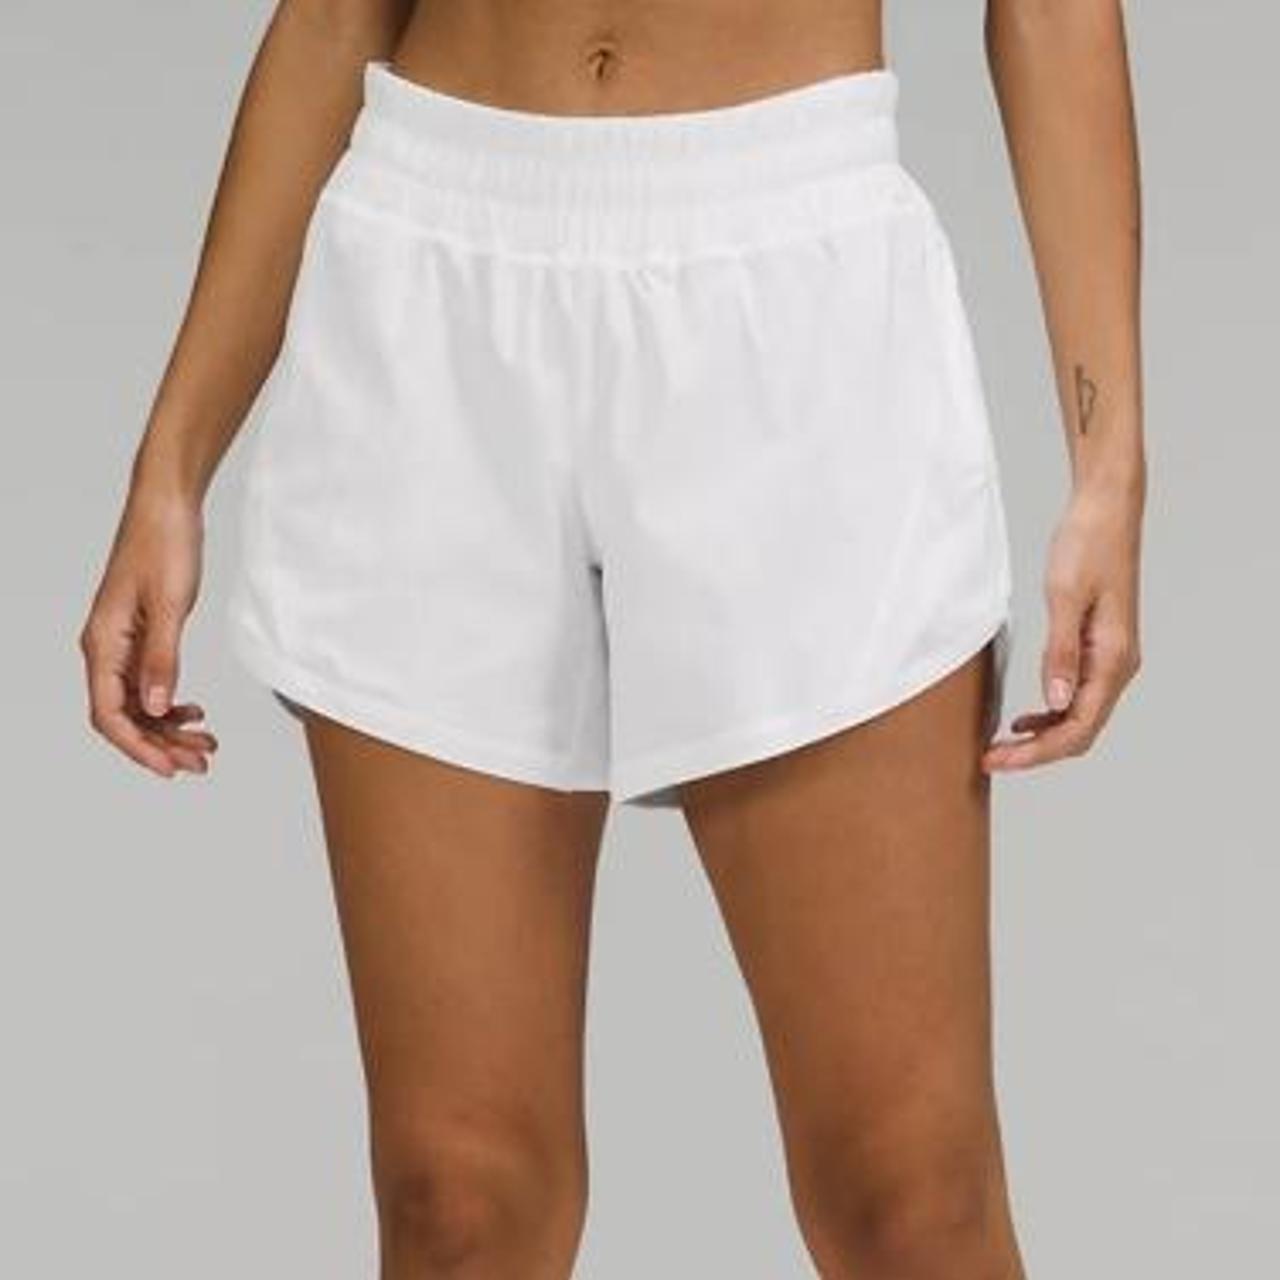 Track That Mid-Rise Lined Short 5, Women's Shorts